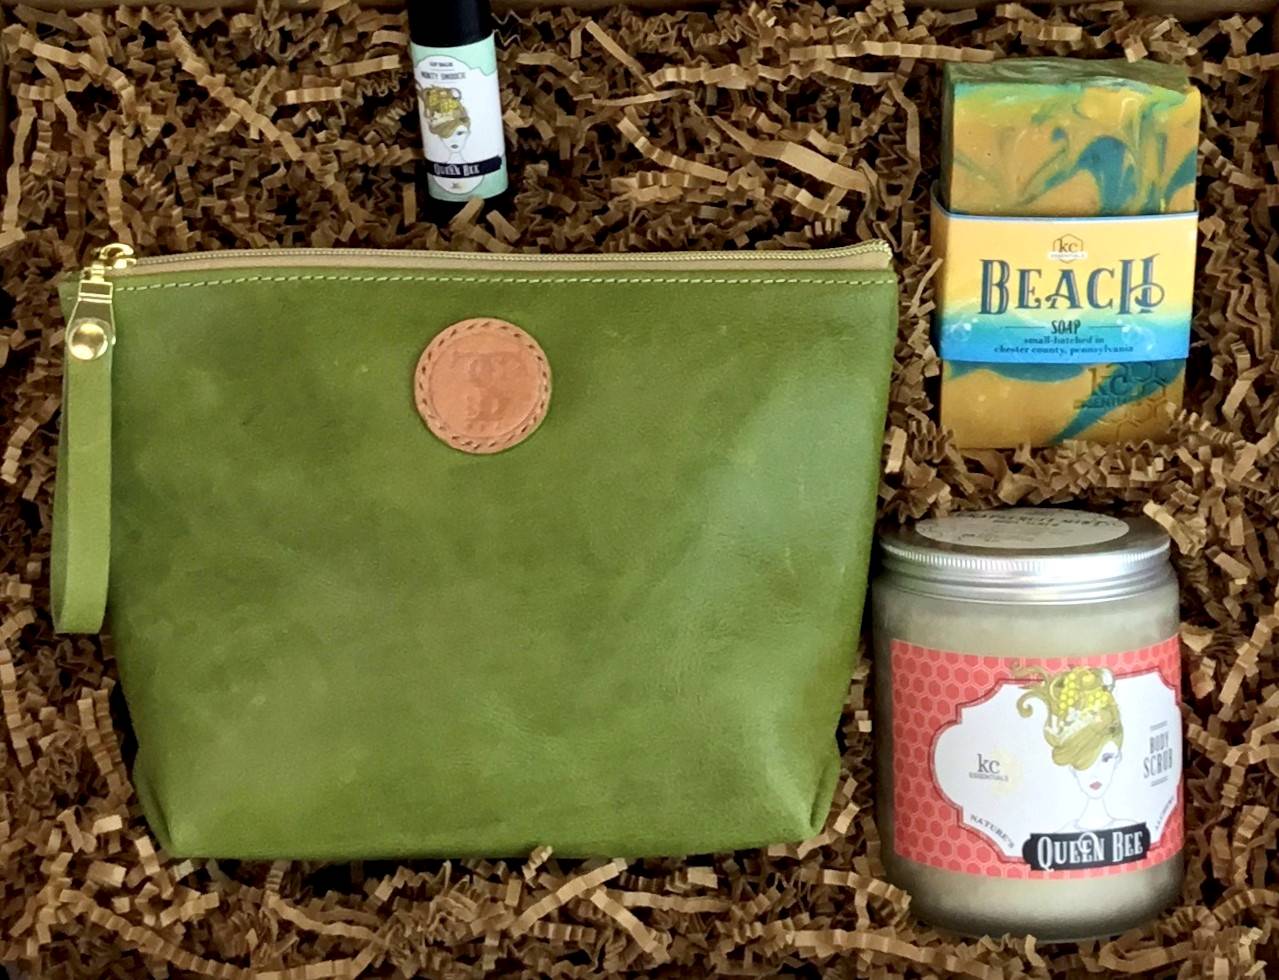 Town &amp; Shore Handcrafted Serenity Gift set featuring T5 Leather bath kit and brush bag shown in aloe green calfskin leather. KC Essentials artisan made vegan bar soap, essential oils body scrub and soothing lip balm. Arranged in gift box with sustainable eco-friendly craft crinkle paper.